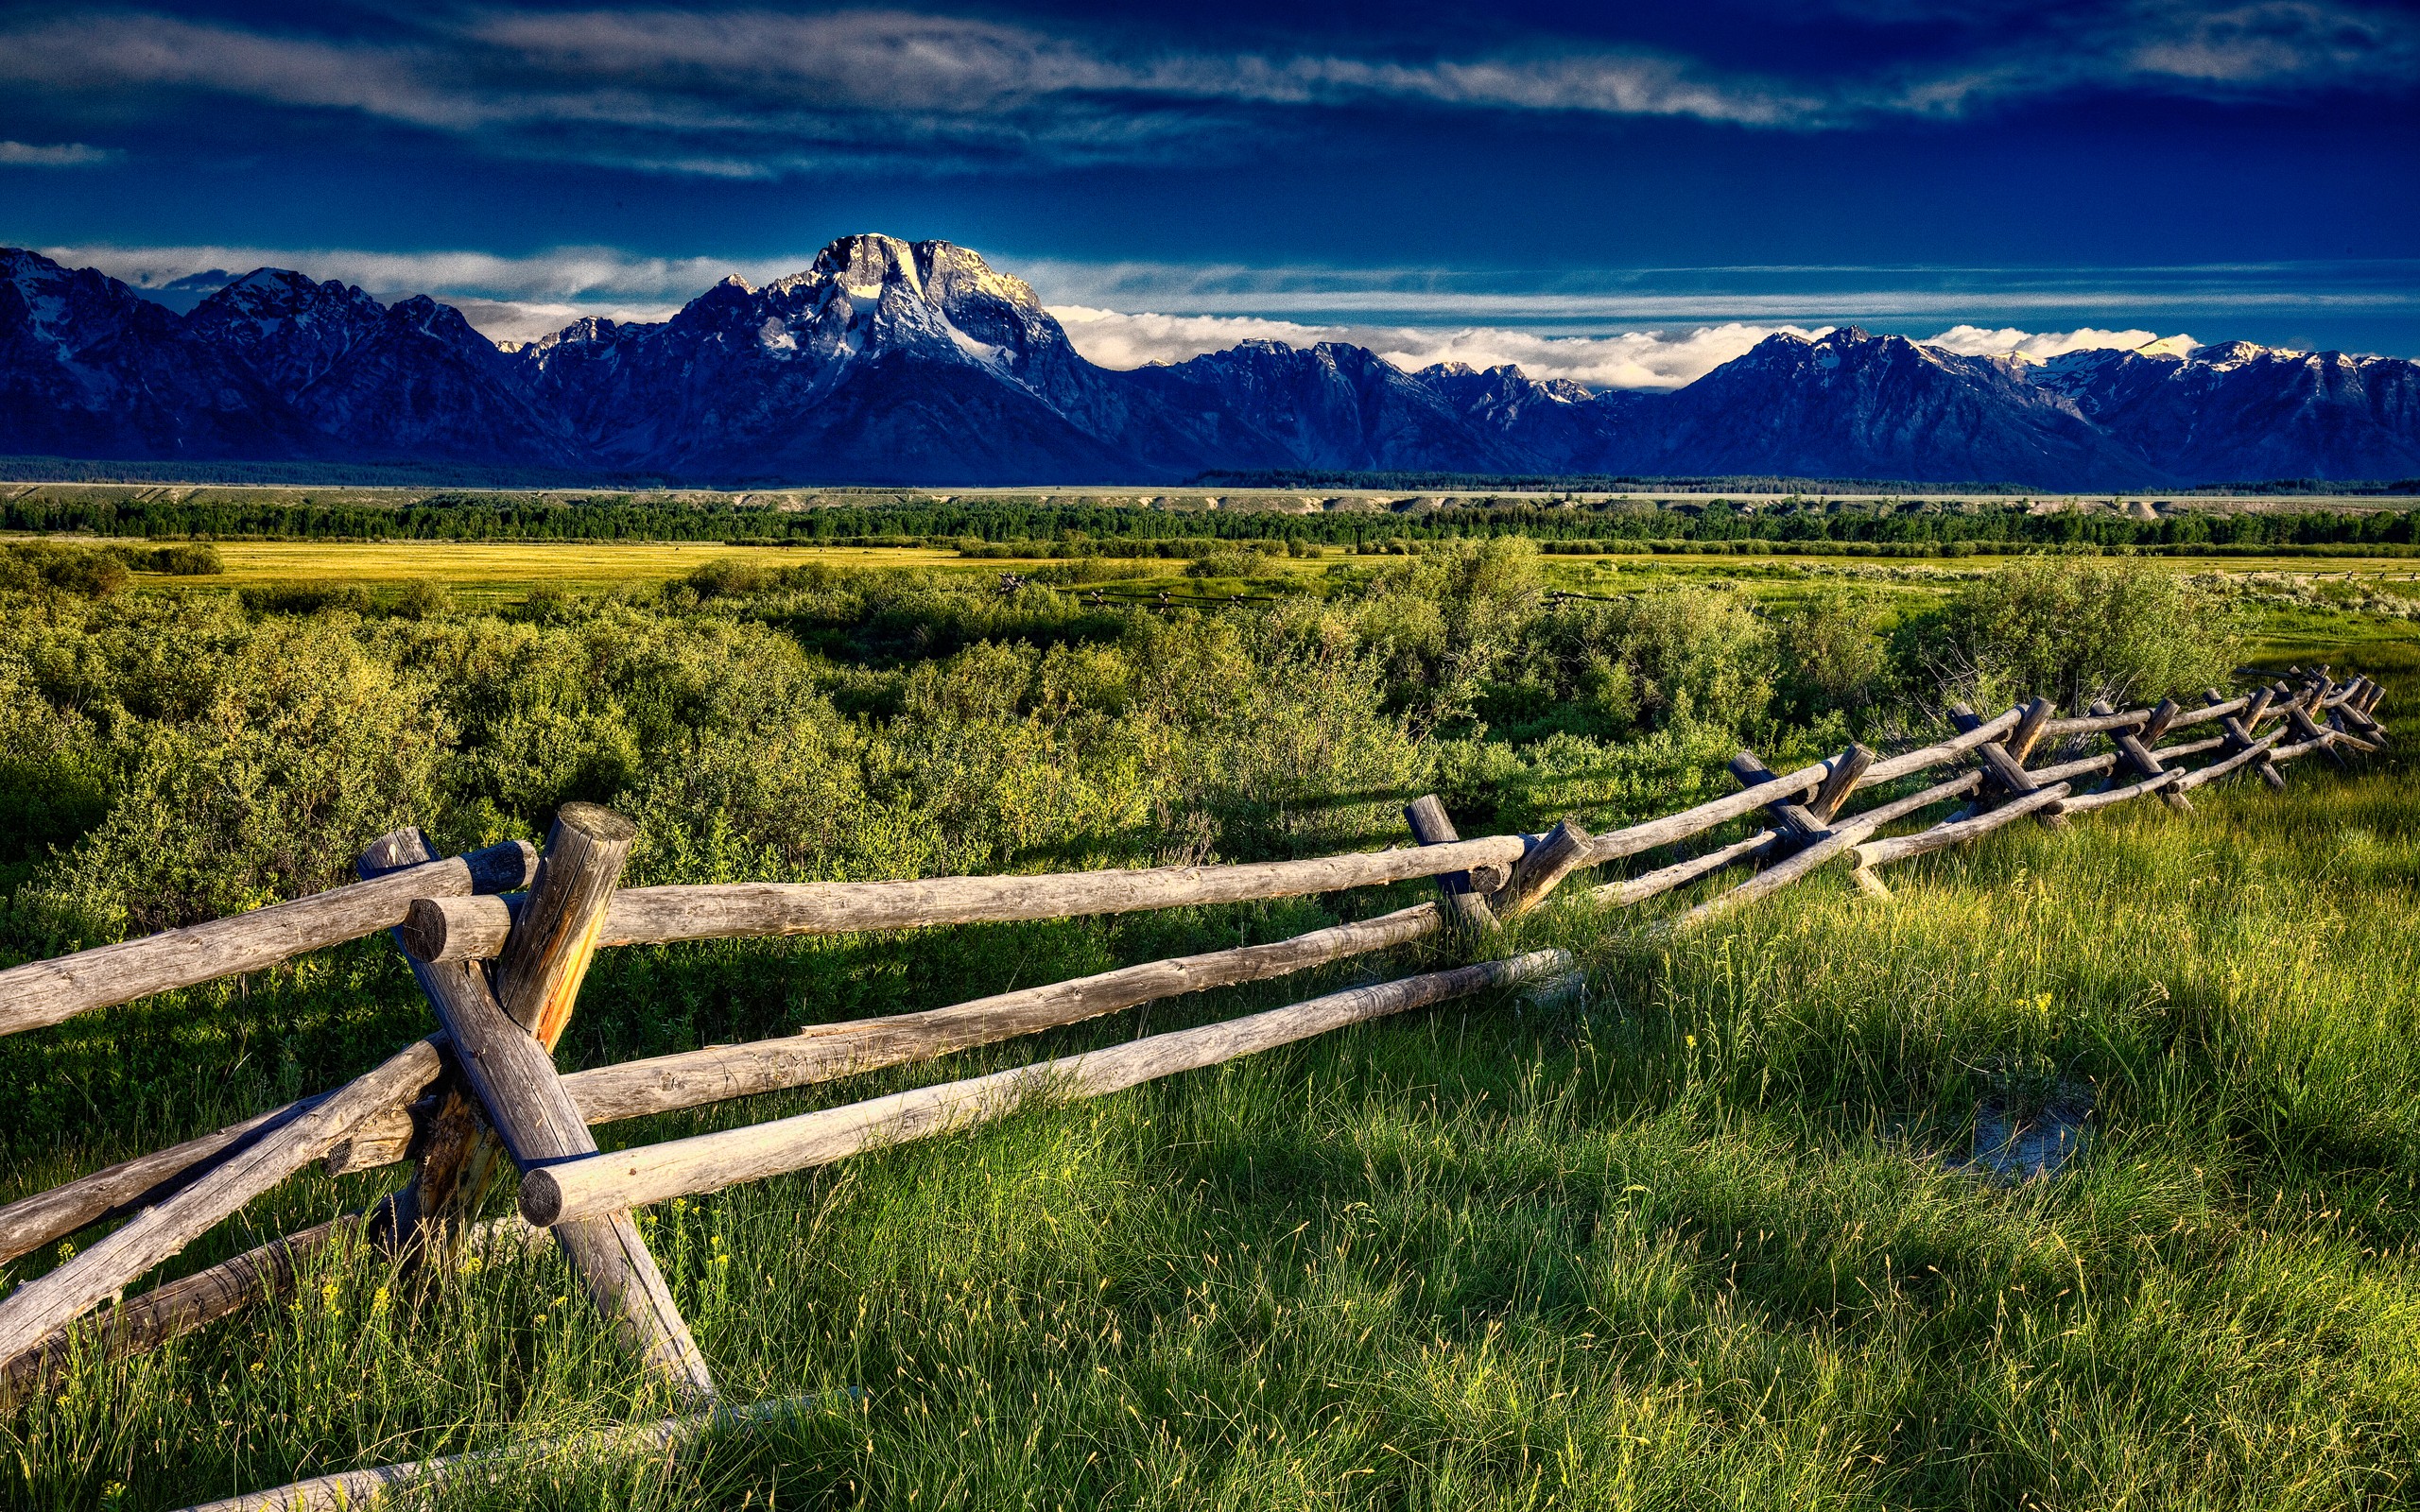 General 2560x1600 nature landscape grass fence mountains outdoors field